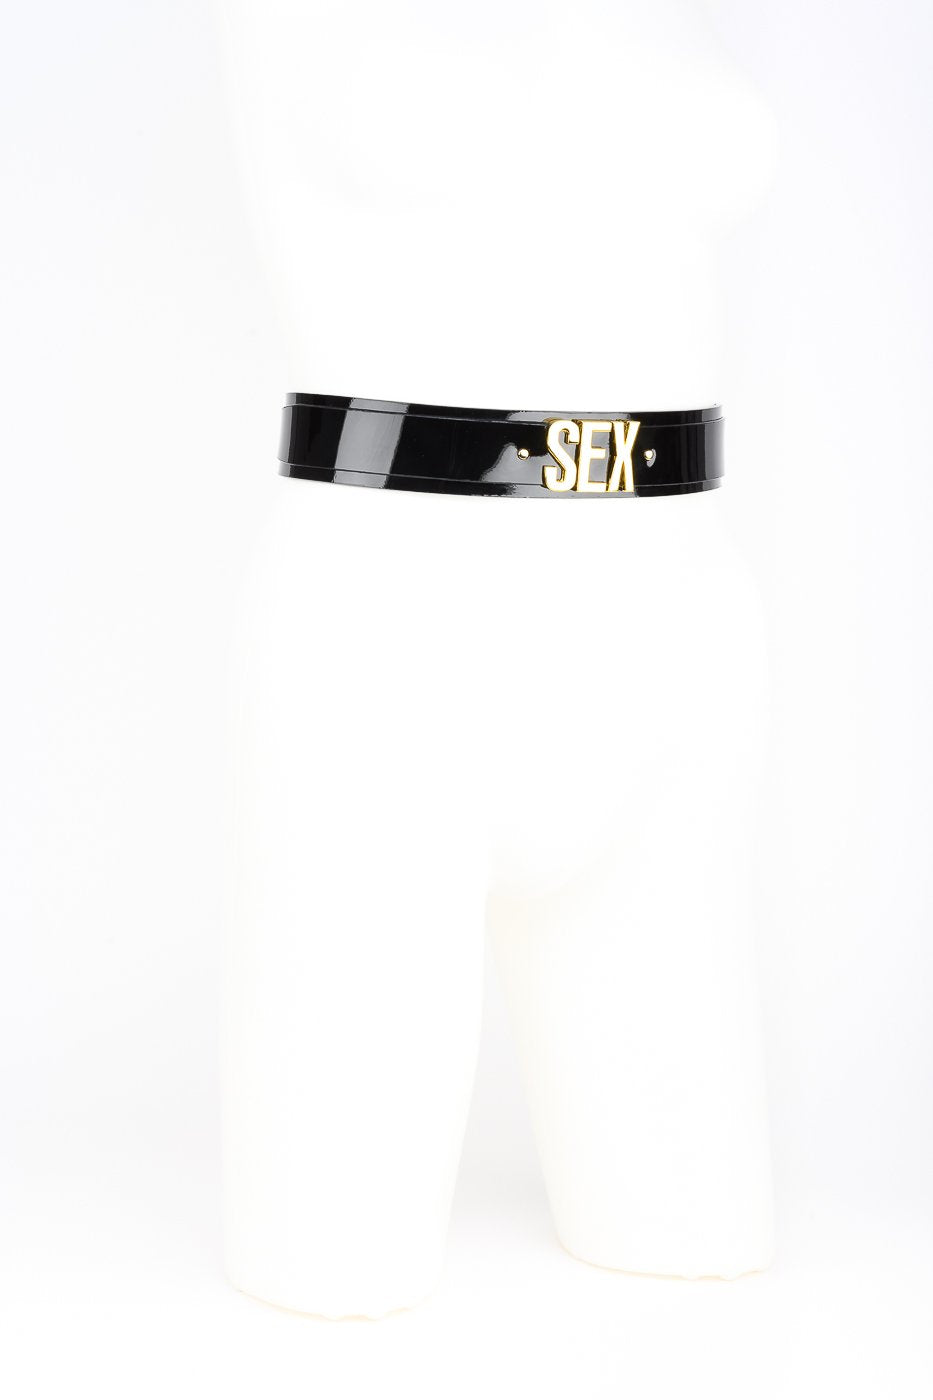 Sex Belt in Black Patent Leather by Fraulein Kink